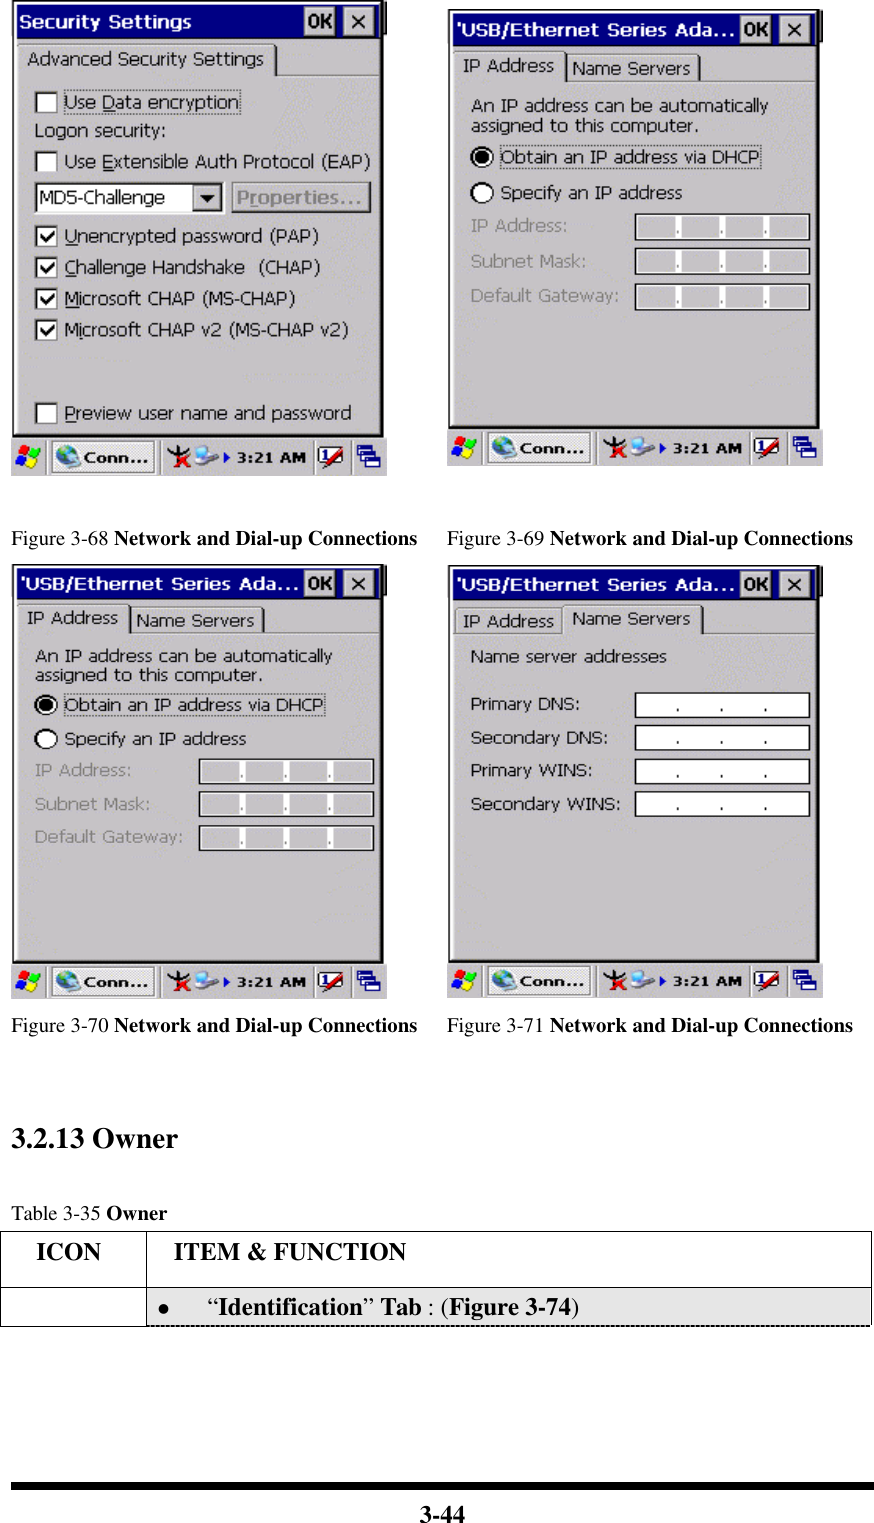  3-44    Figure 3-68 Network and Dial-up Connections Figure 3-69 Network and Dial-up Connections   Figure 3-70 Network and Dial-up Connections Figure 3-71 Network and Dial-up Connections   3.2.13 Owner    Table 3-35 Owner   ICON  ITEM &amp; FUNCTION l “Identification” Tab : (Figure 3-74) 